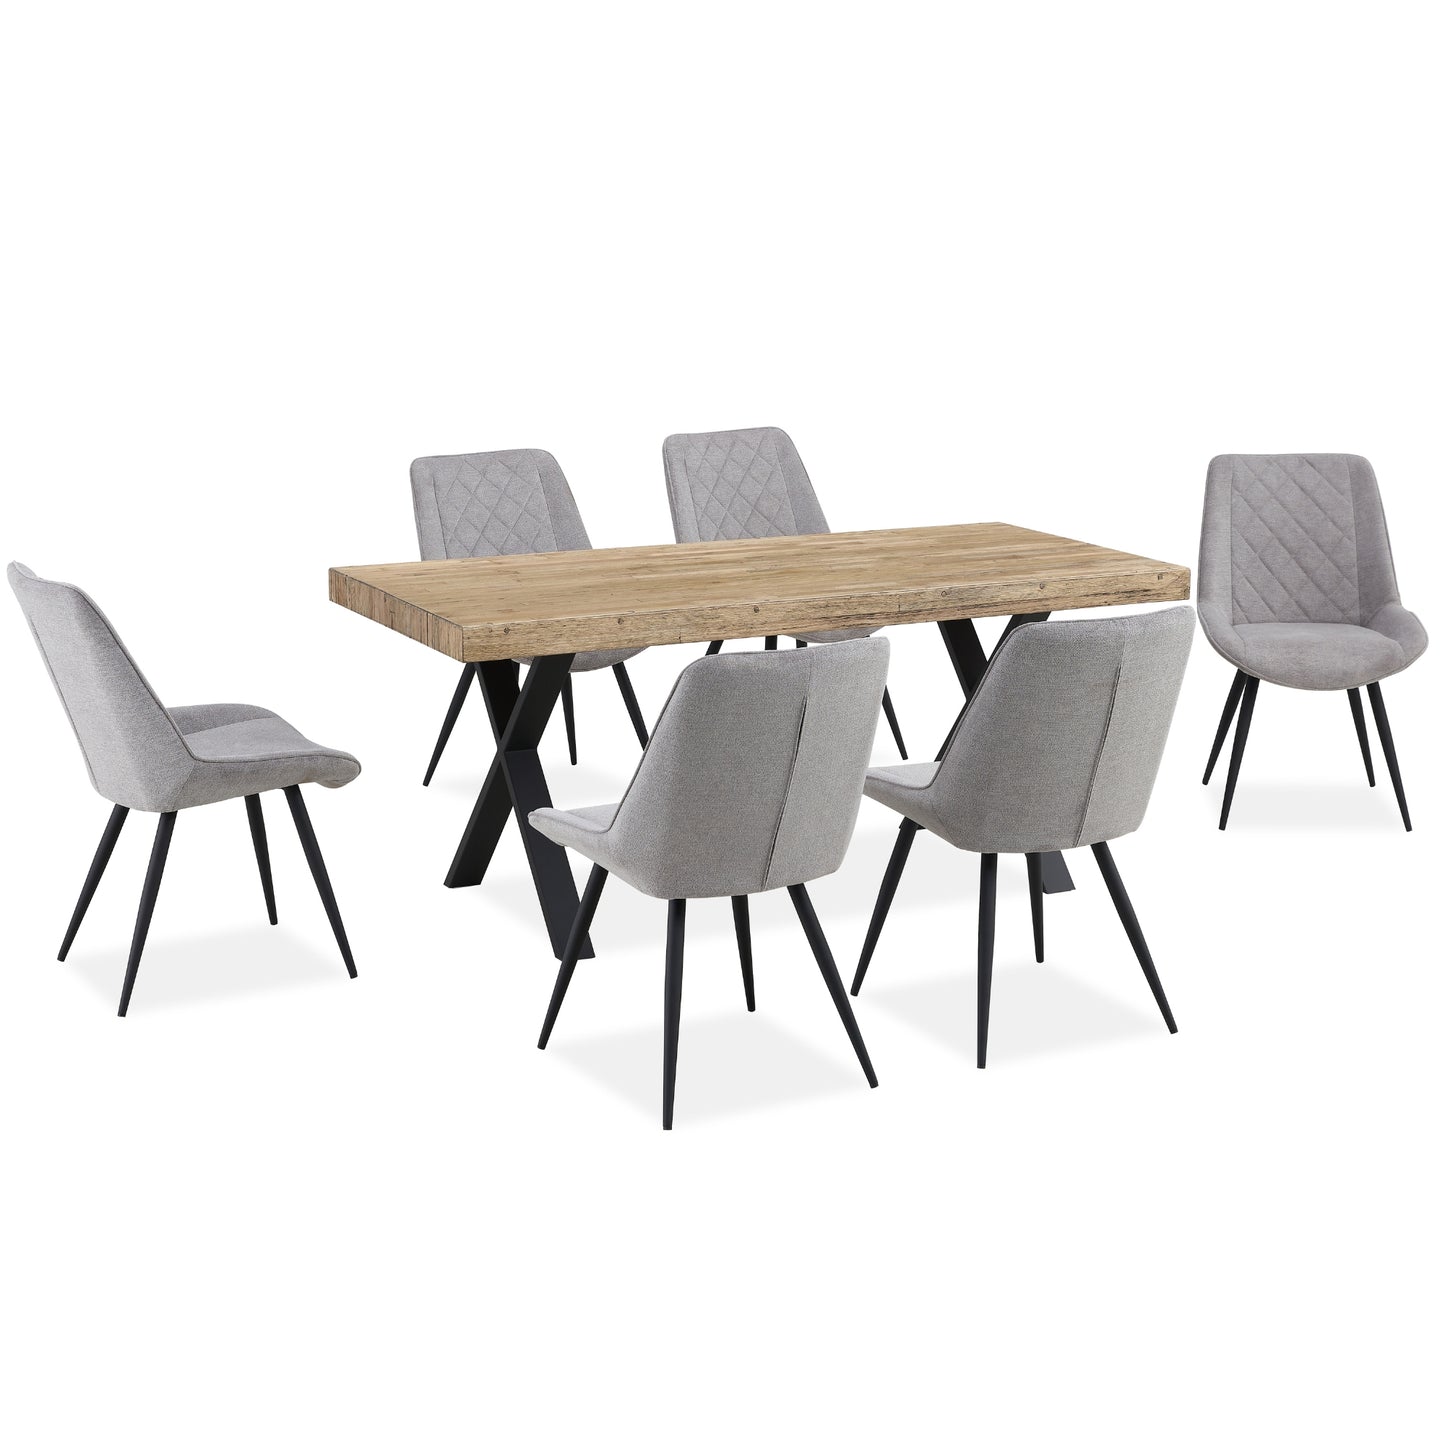 Helenium Dining Chair Set of 6 Fabric Seat with Metal Frame - Granite